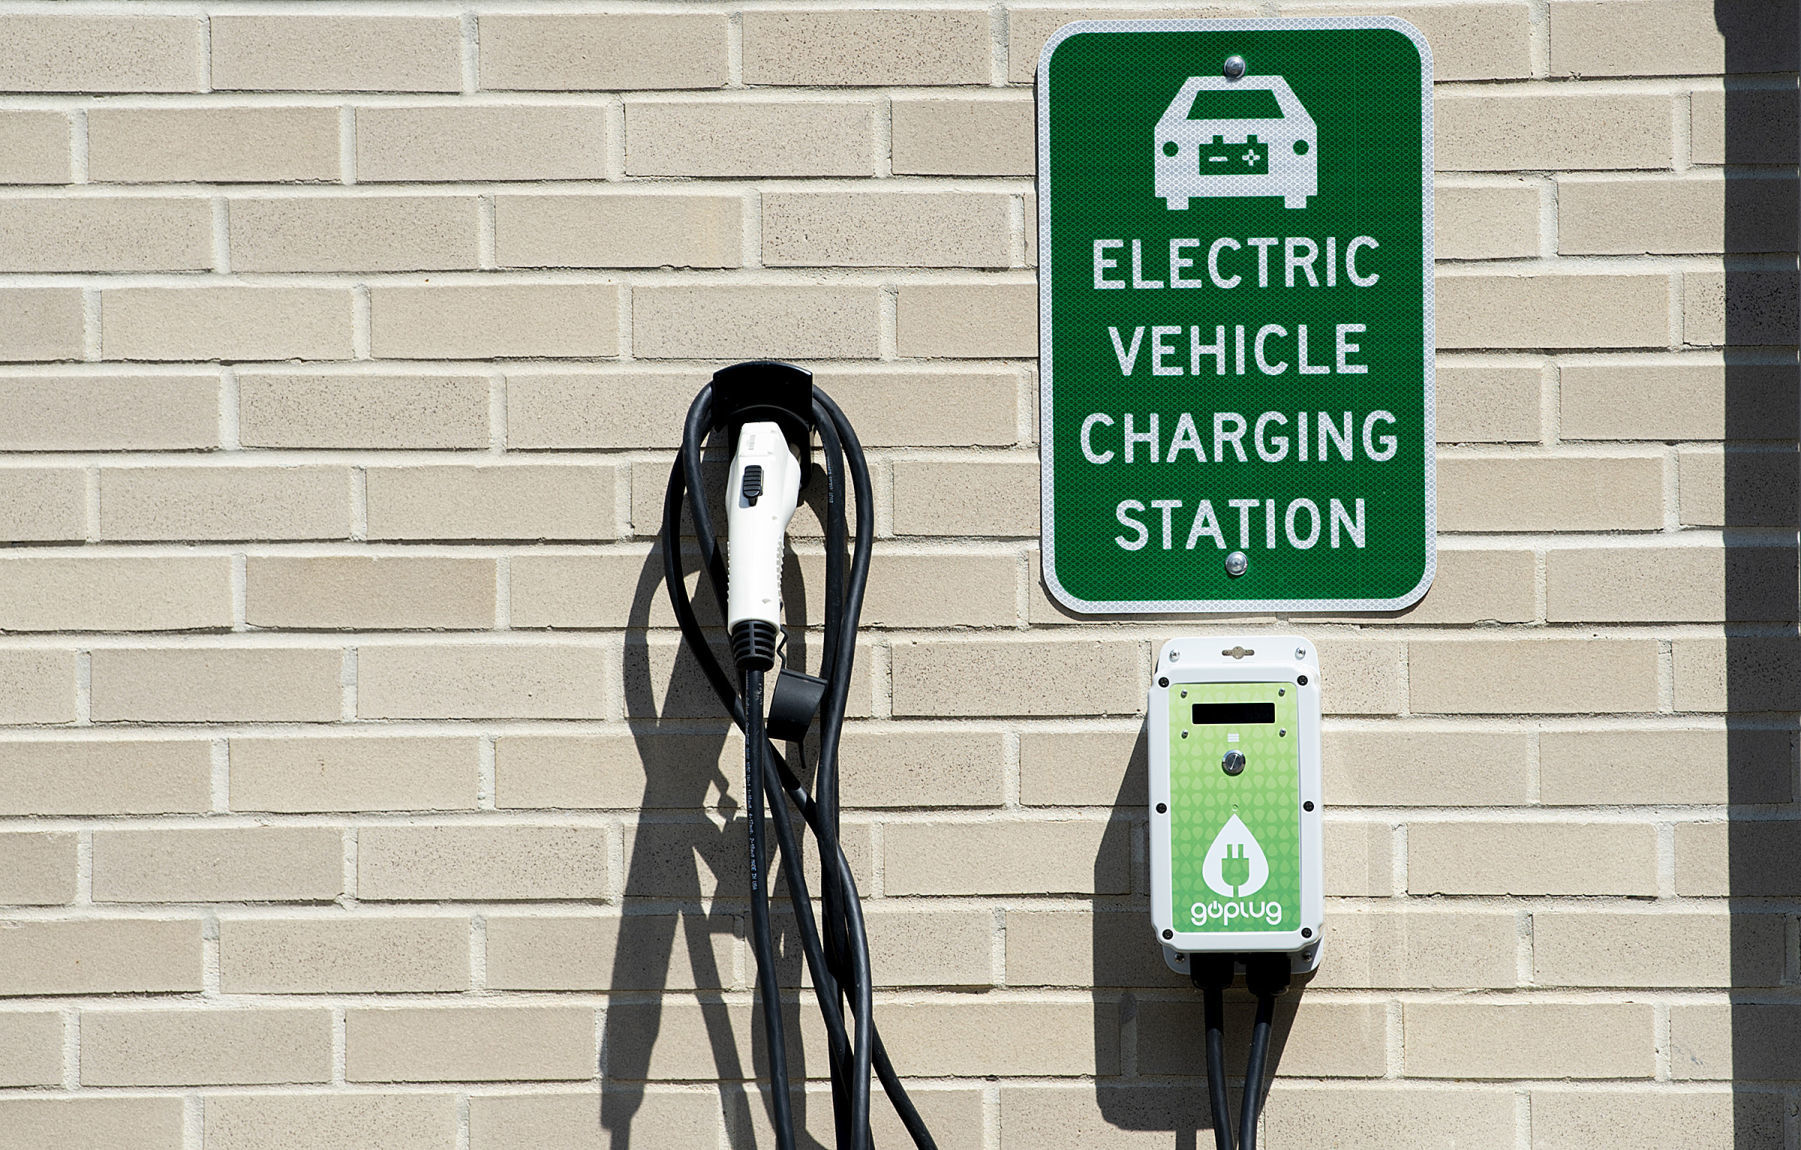 Potomac Edison To Install More Vehicle Charging Stations In Frederick 